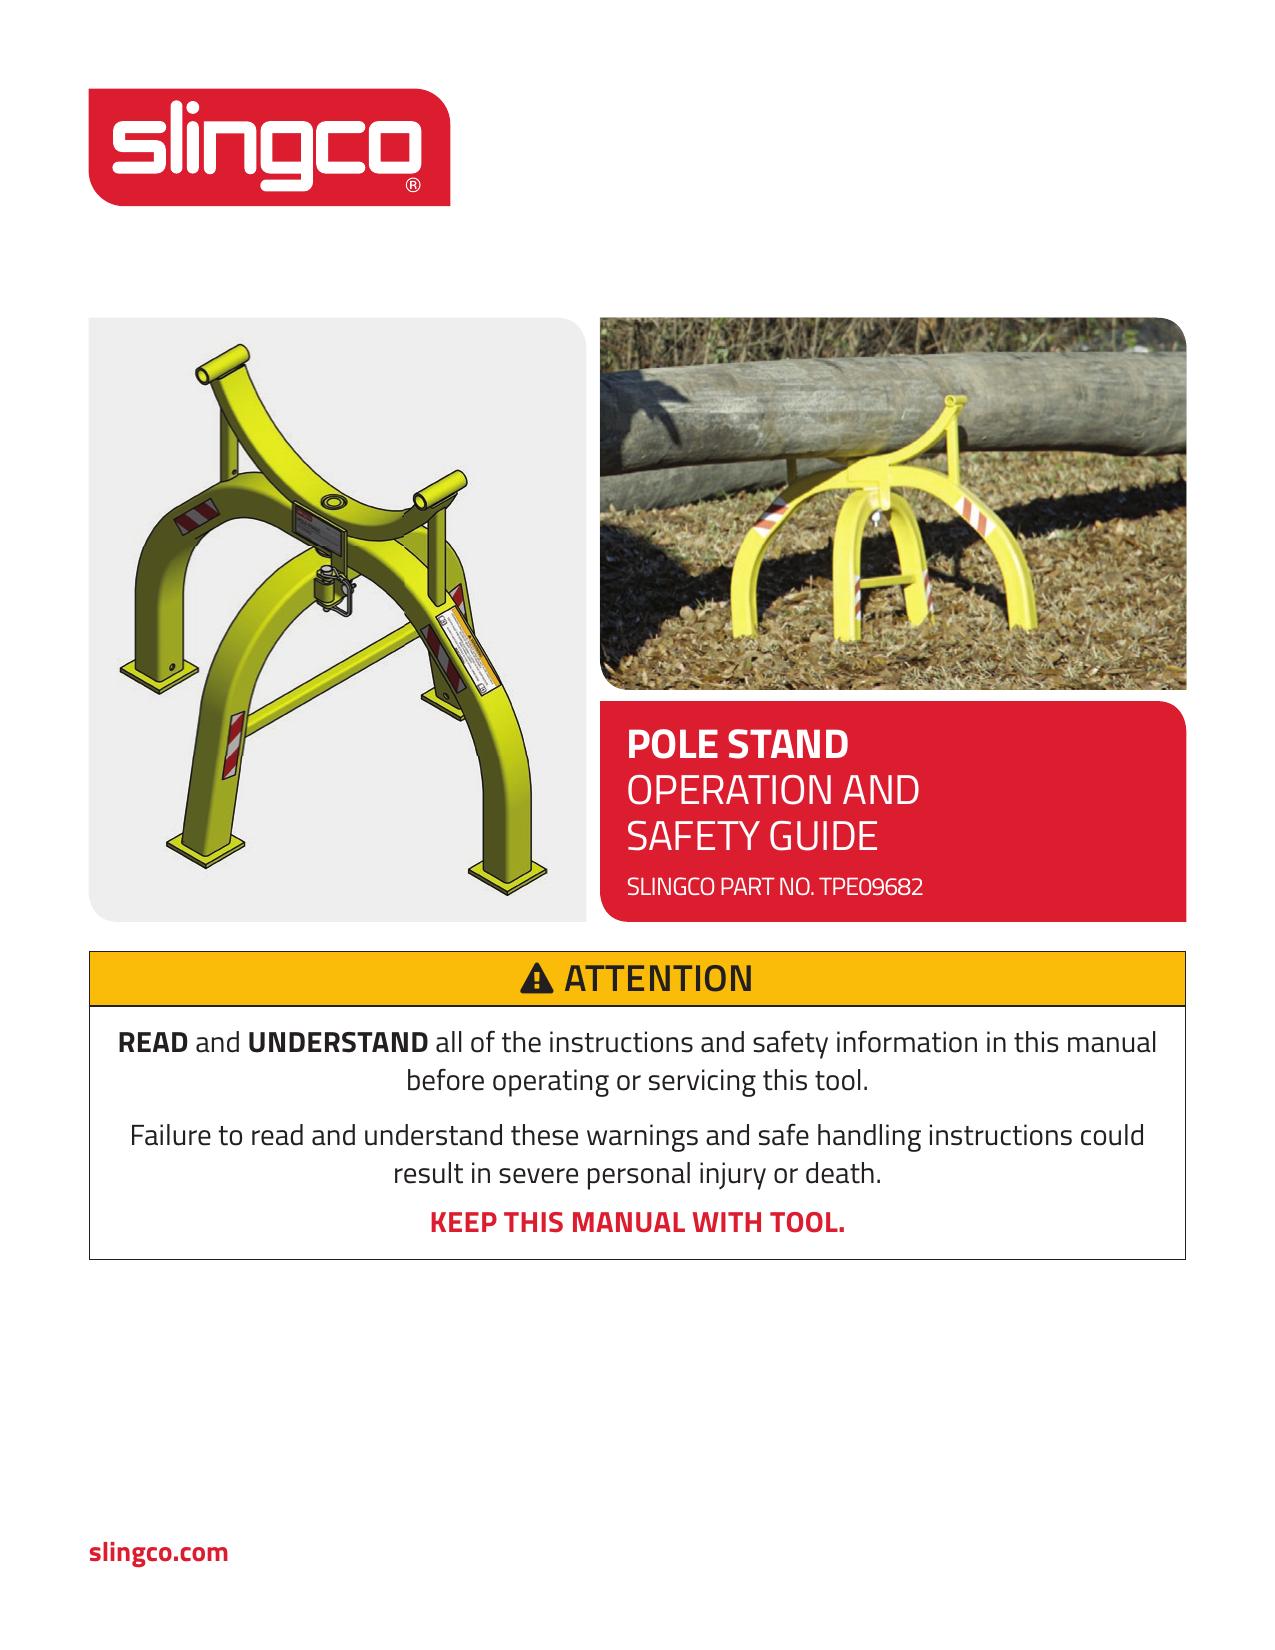 Pole Stand Operation and Safety Guide